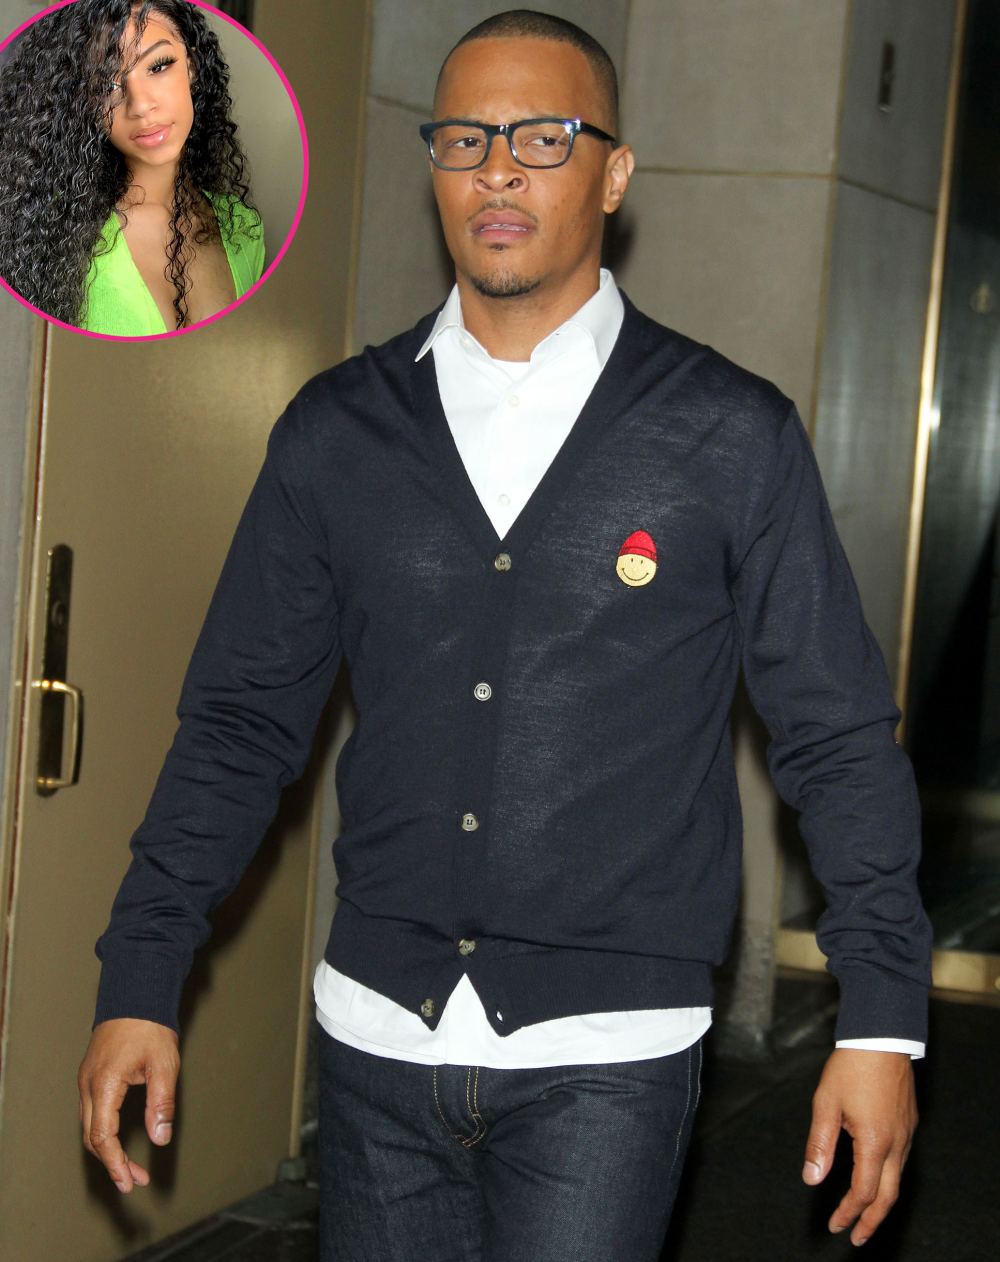 TI Daughter Unfollows Him After His Comments About Her Virginity